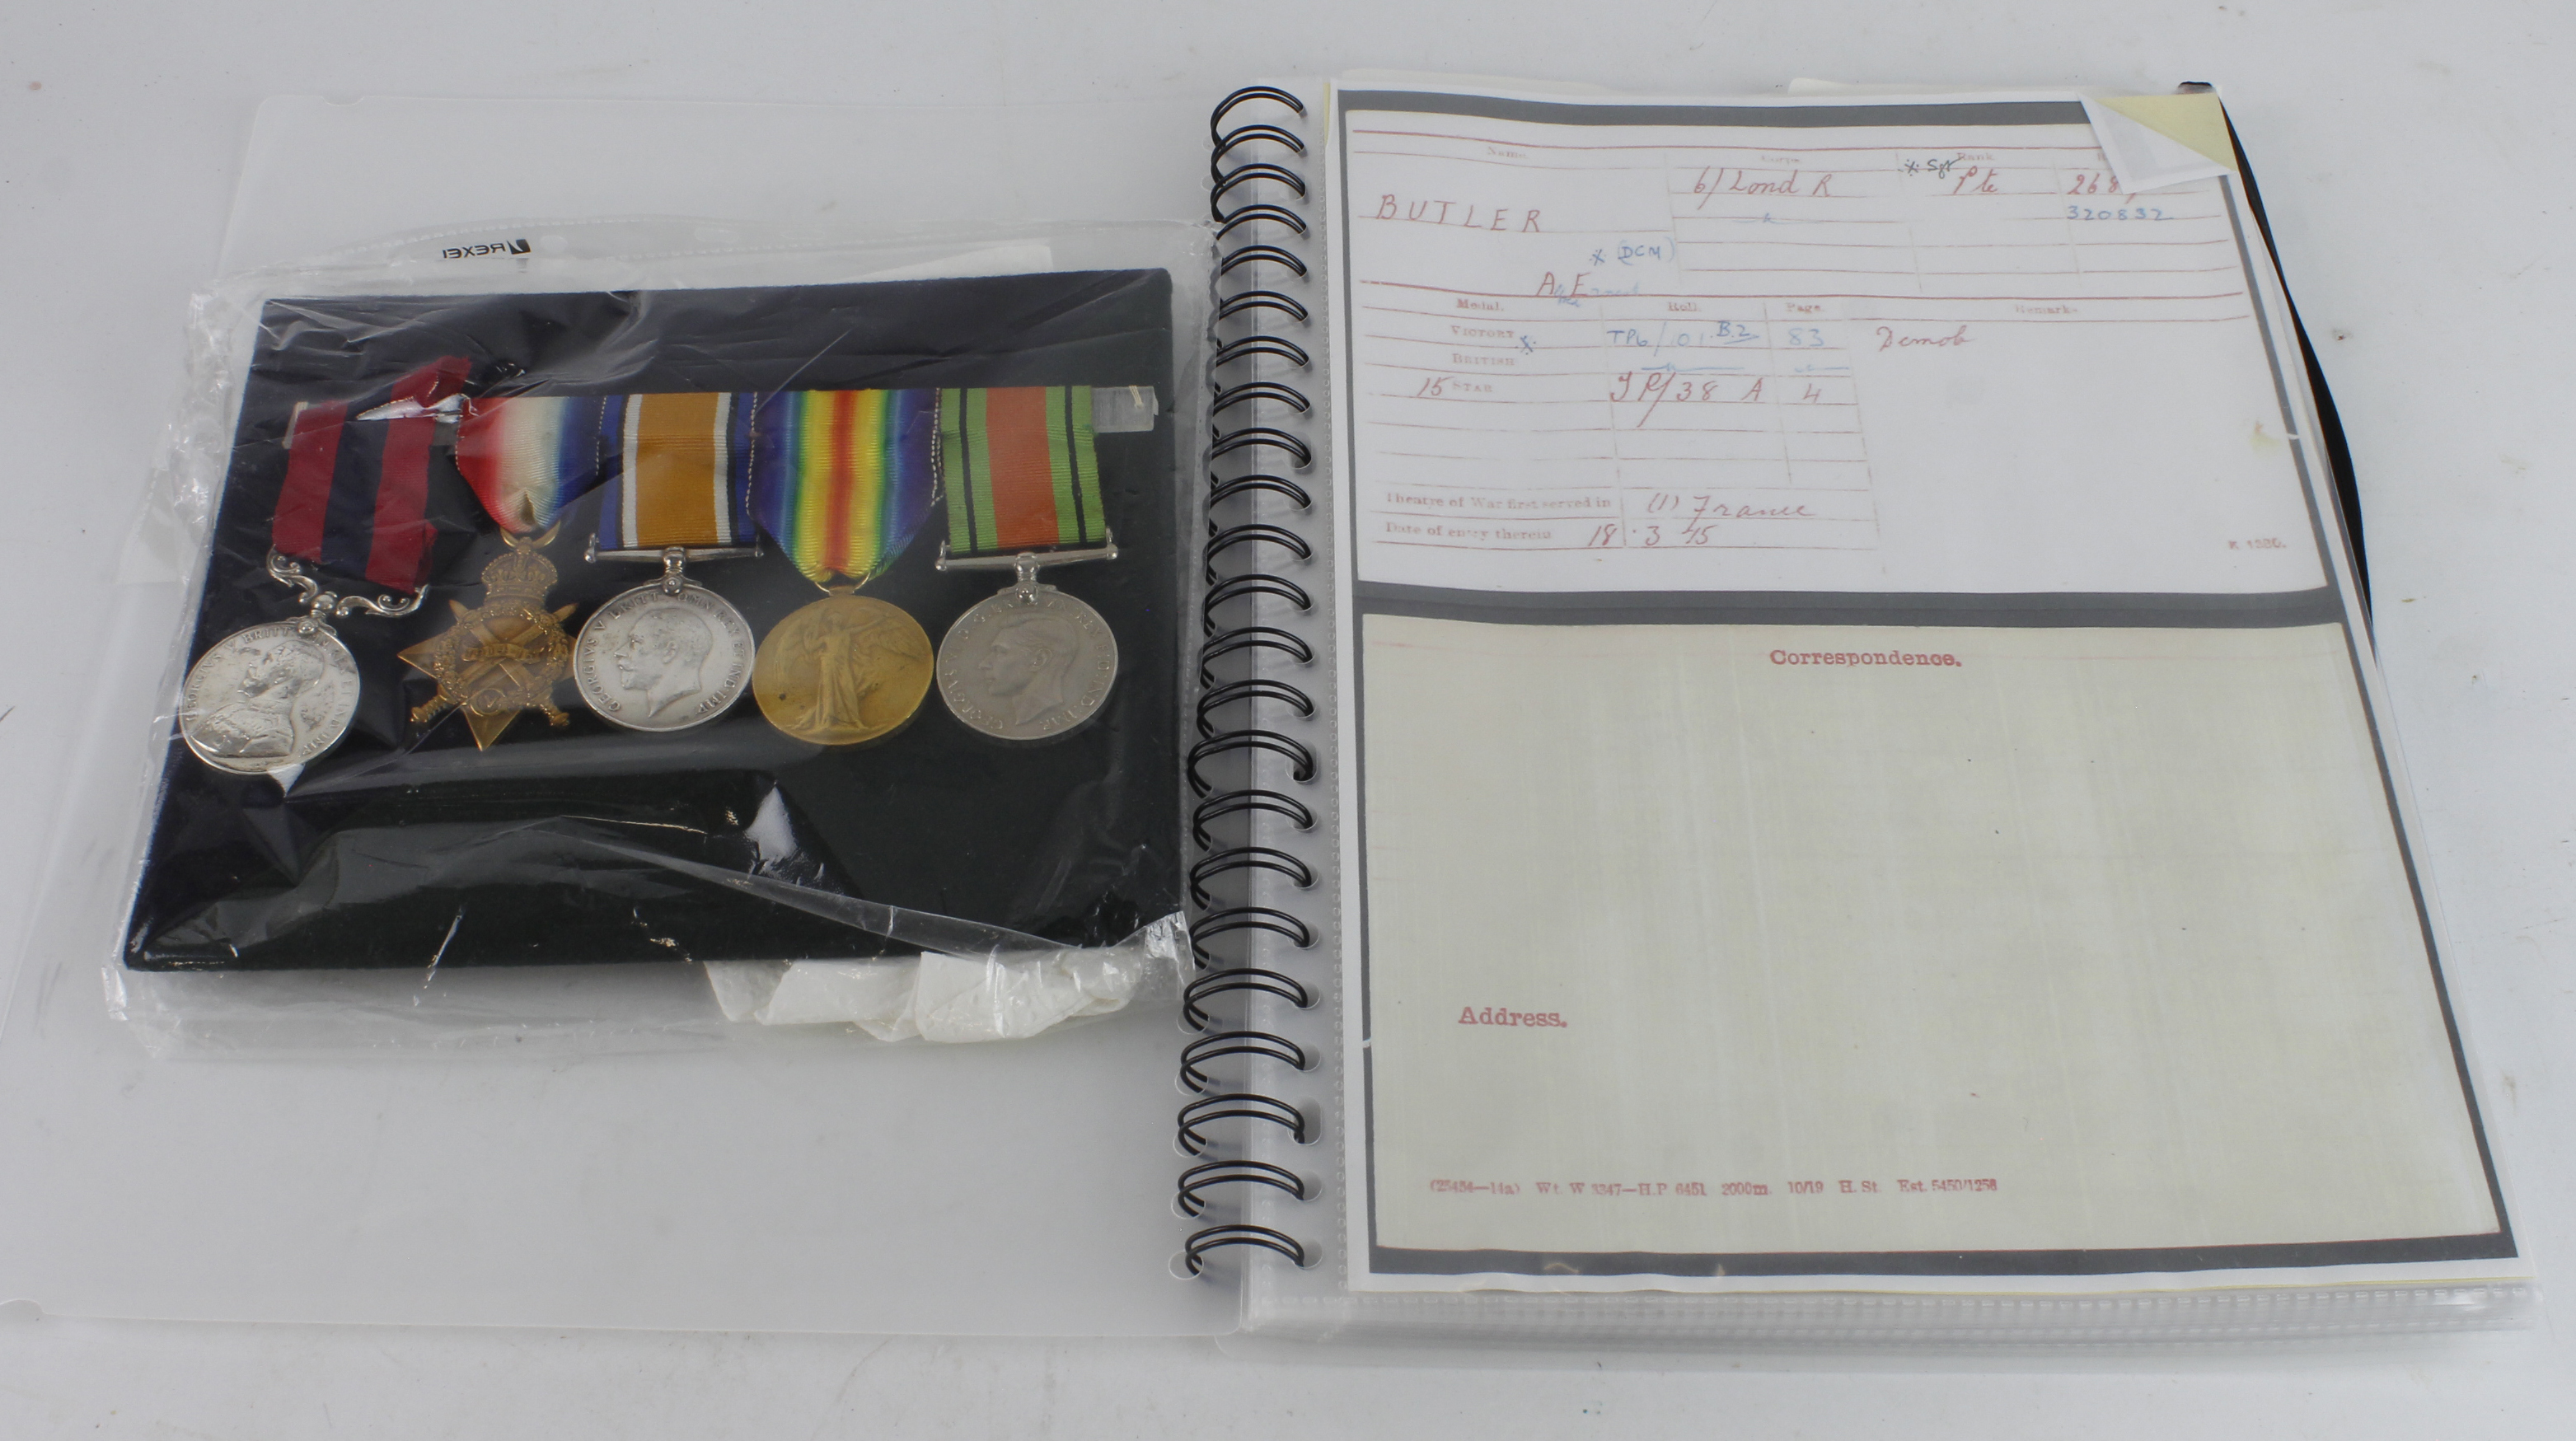 DCM GV, 1915 Star Trio and Defence Medal awarded to 2687/320832 Pte/Sjt A E Butler 6th Bn London